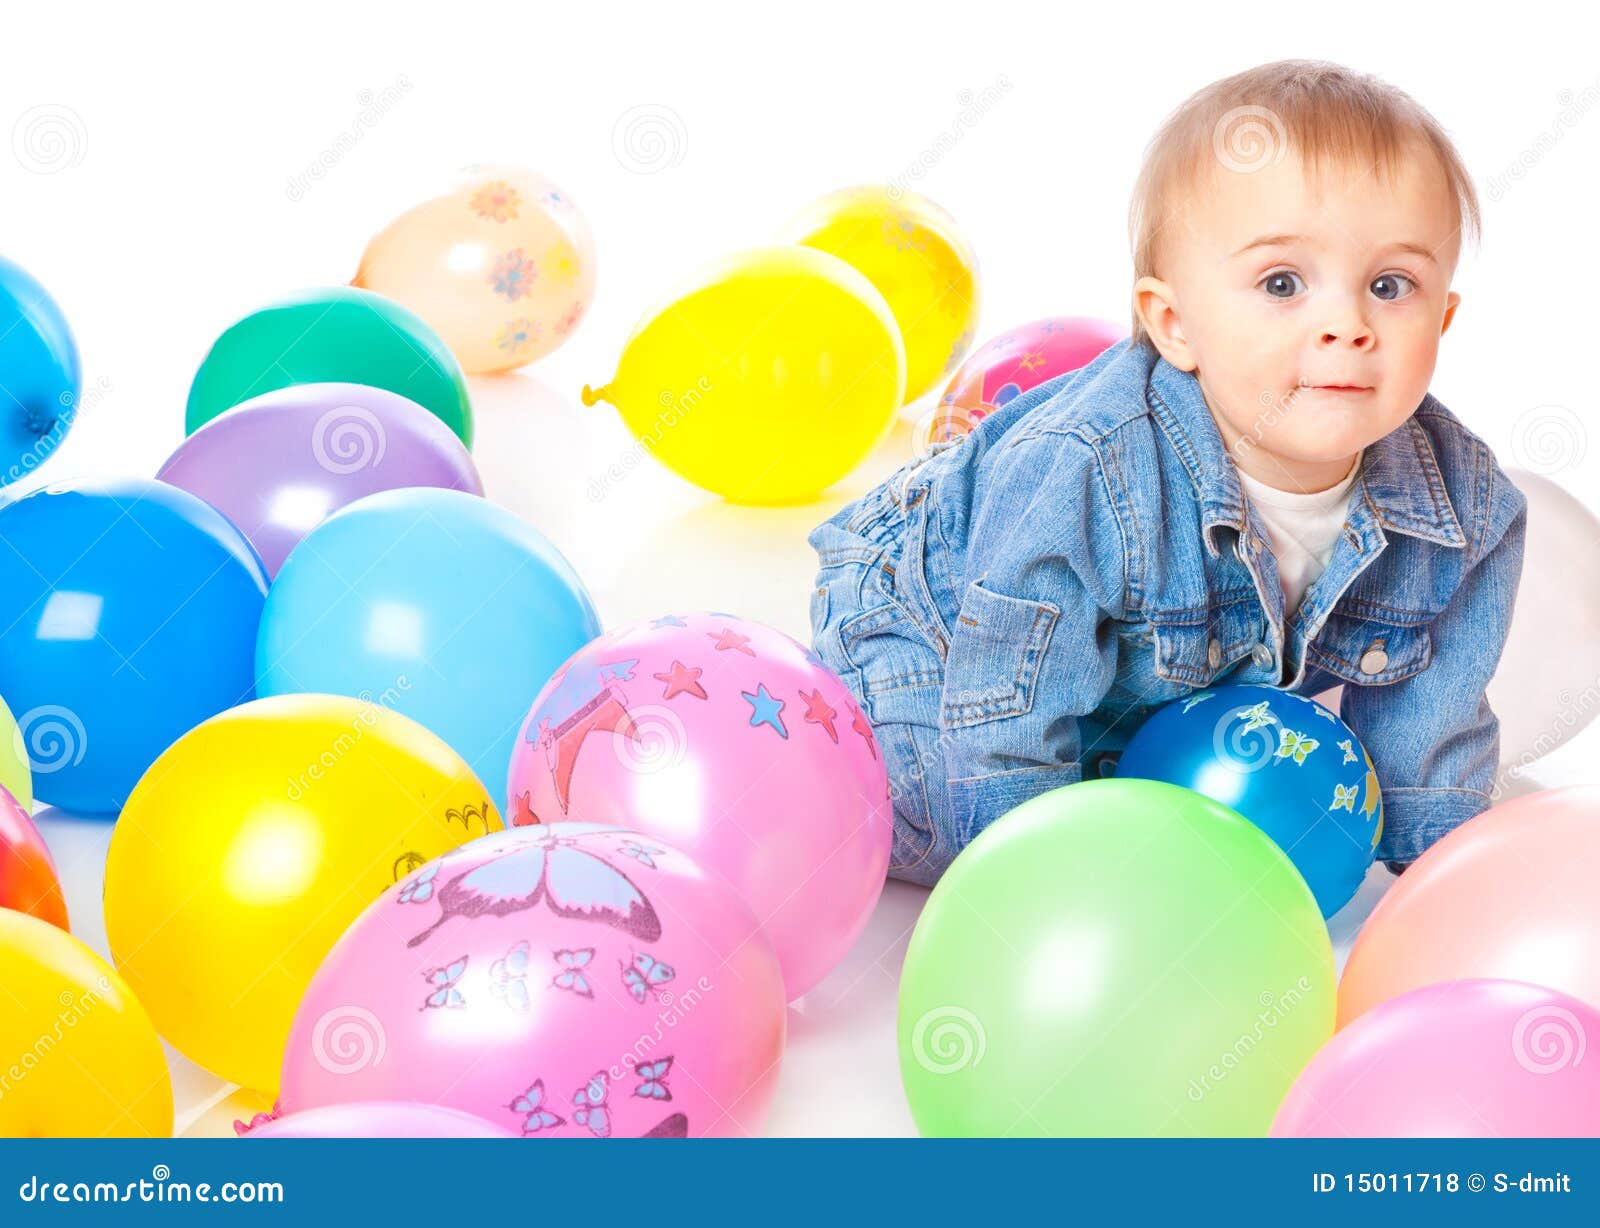 Little baby in balloons stock photo. Image of curly, birthday - 15011718